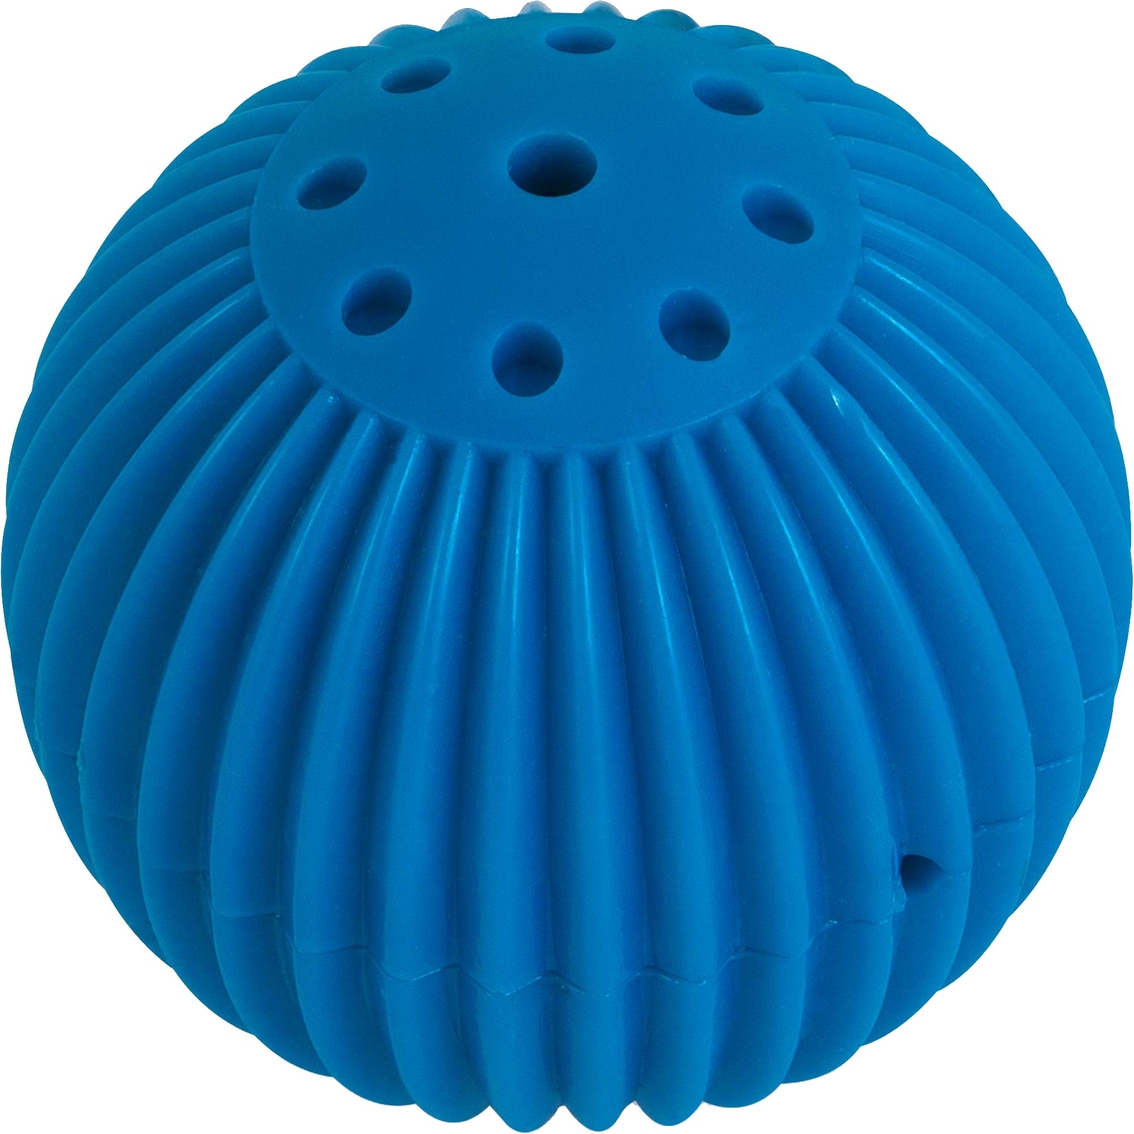 Petmate Pet Qwerks Talking Babble Ball Small Dog Toy - Image 3 of 5